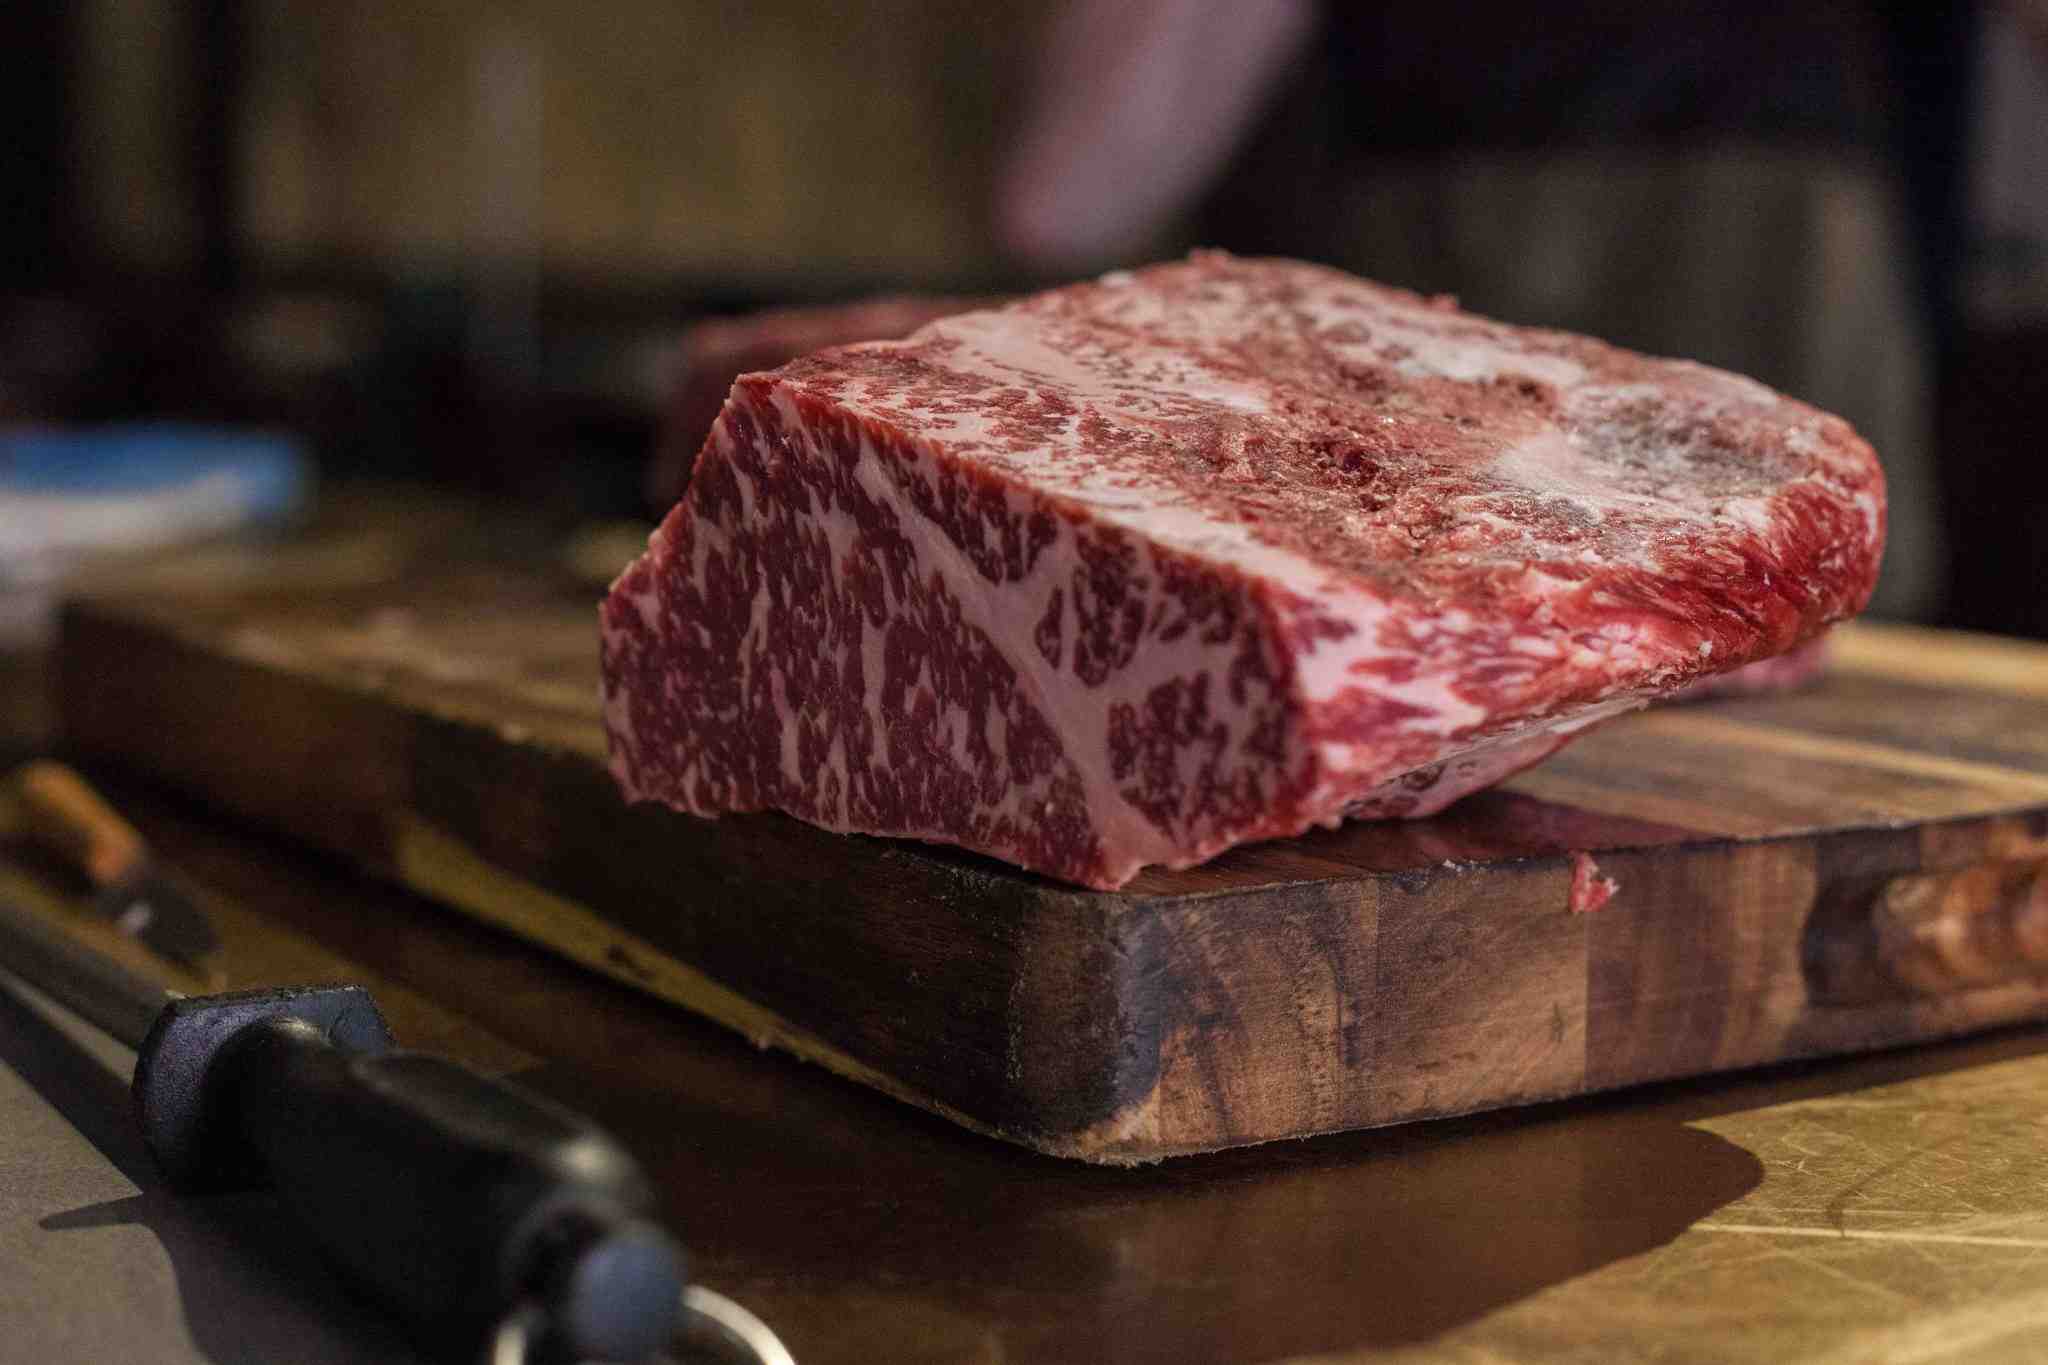 What type of fat is beef fat?